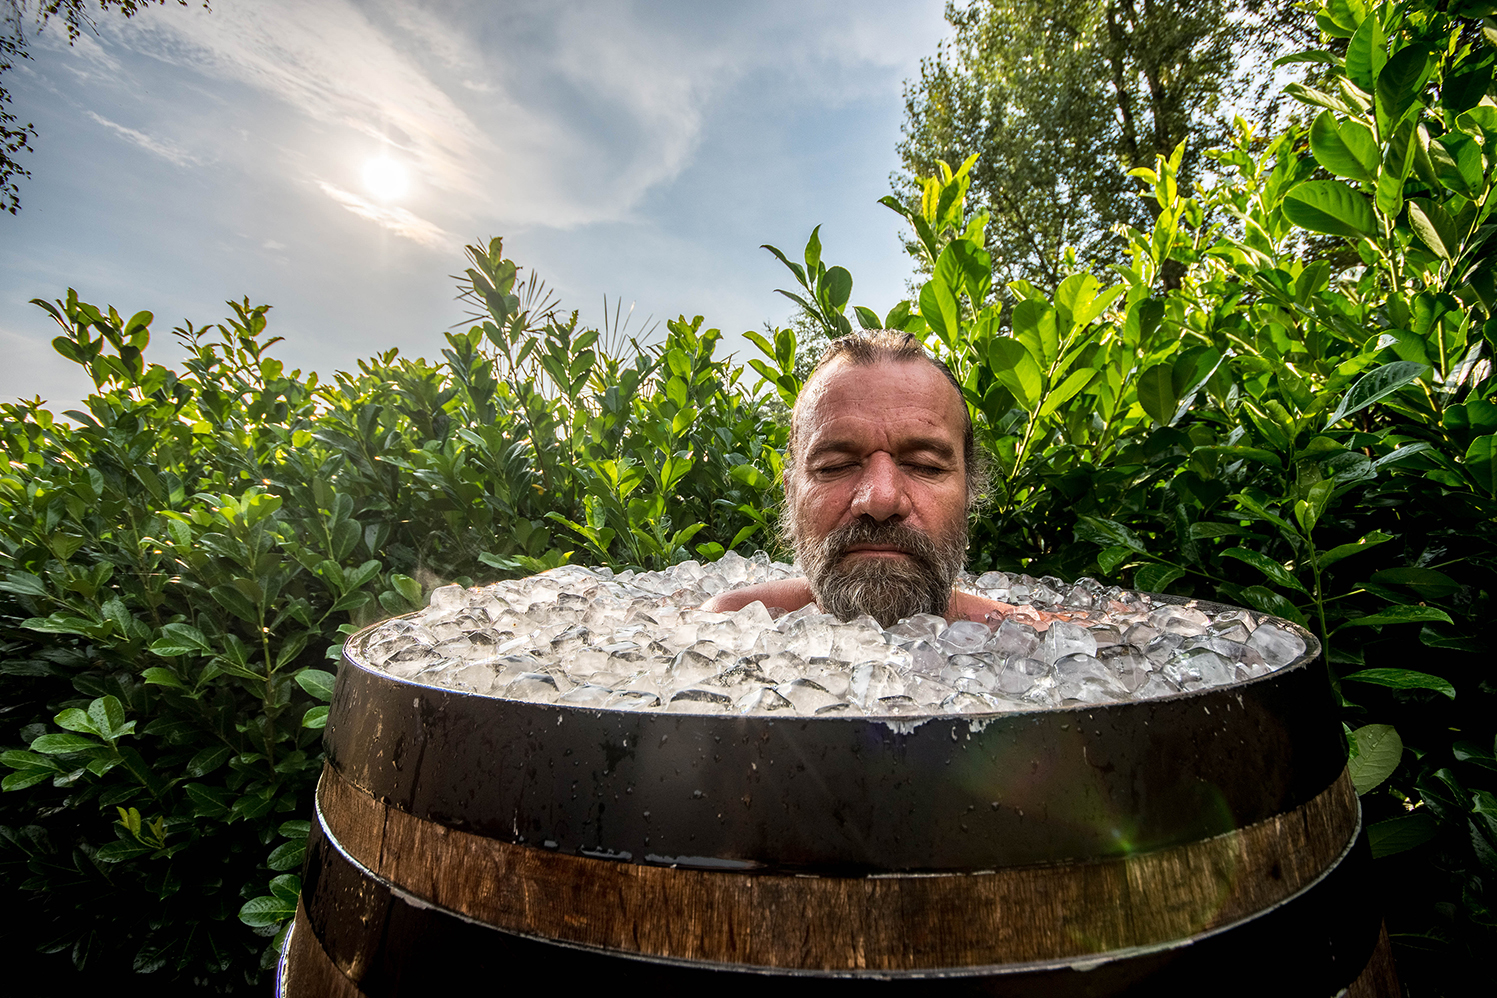 How Wim Hof Became the World’s Most Famous Breathworker